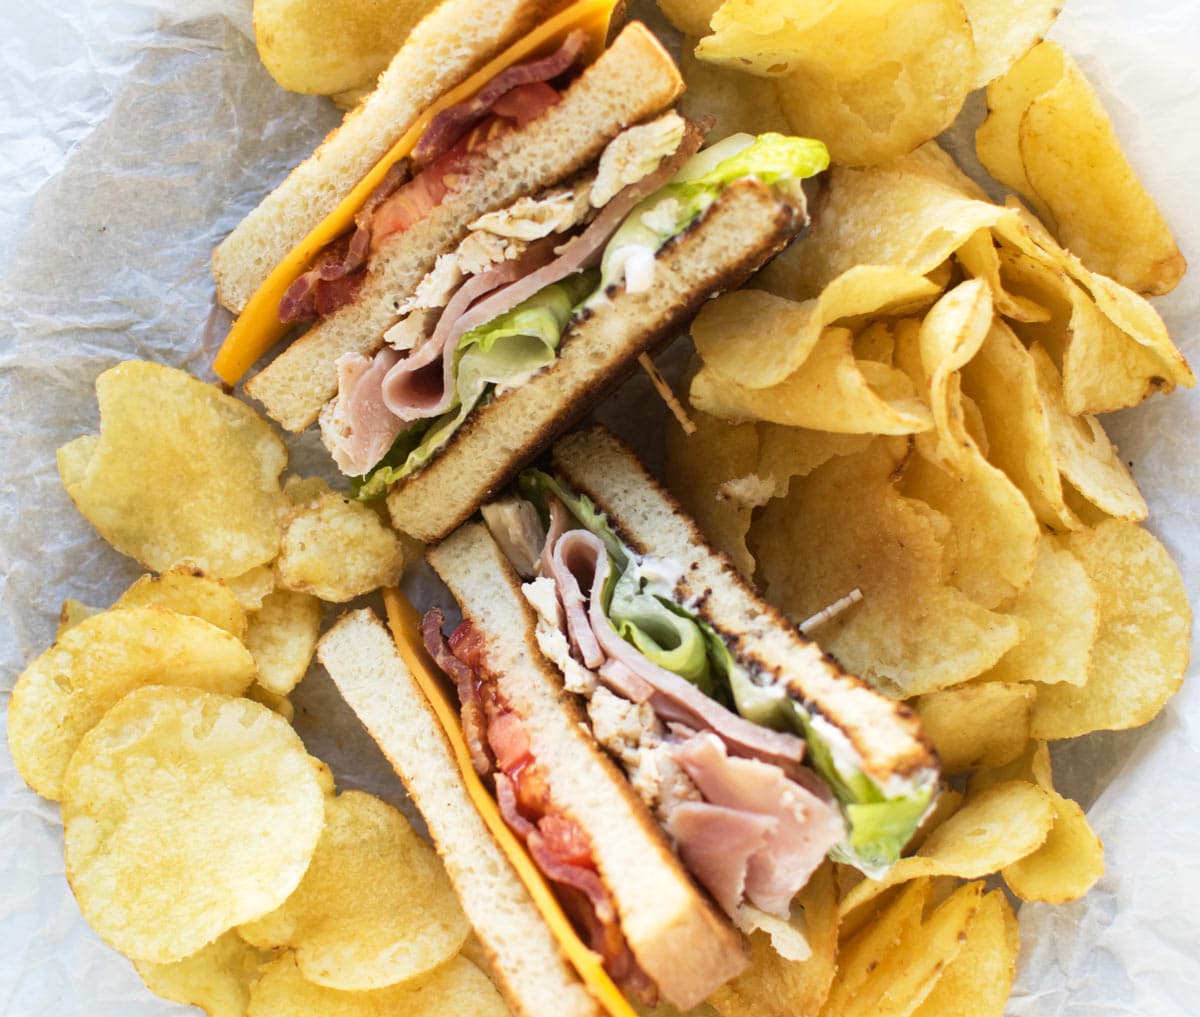 club sandwiches with salt and vinegar chips.